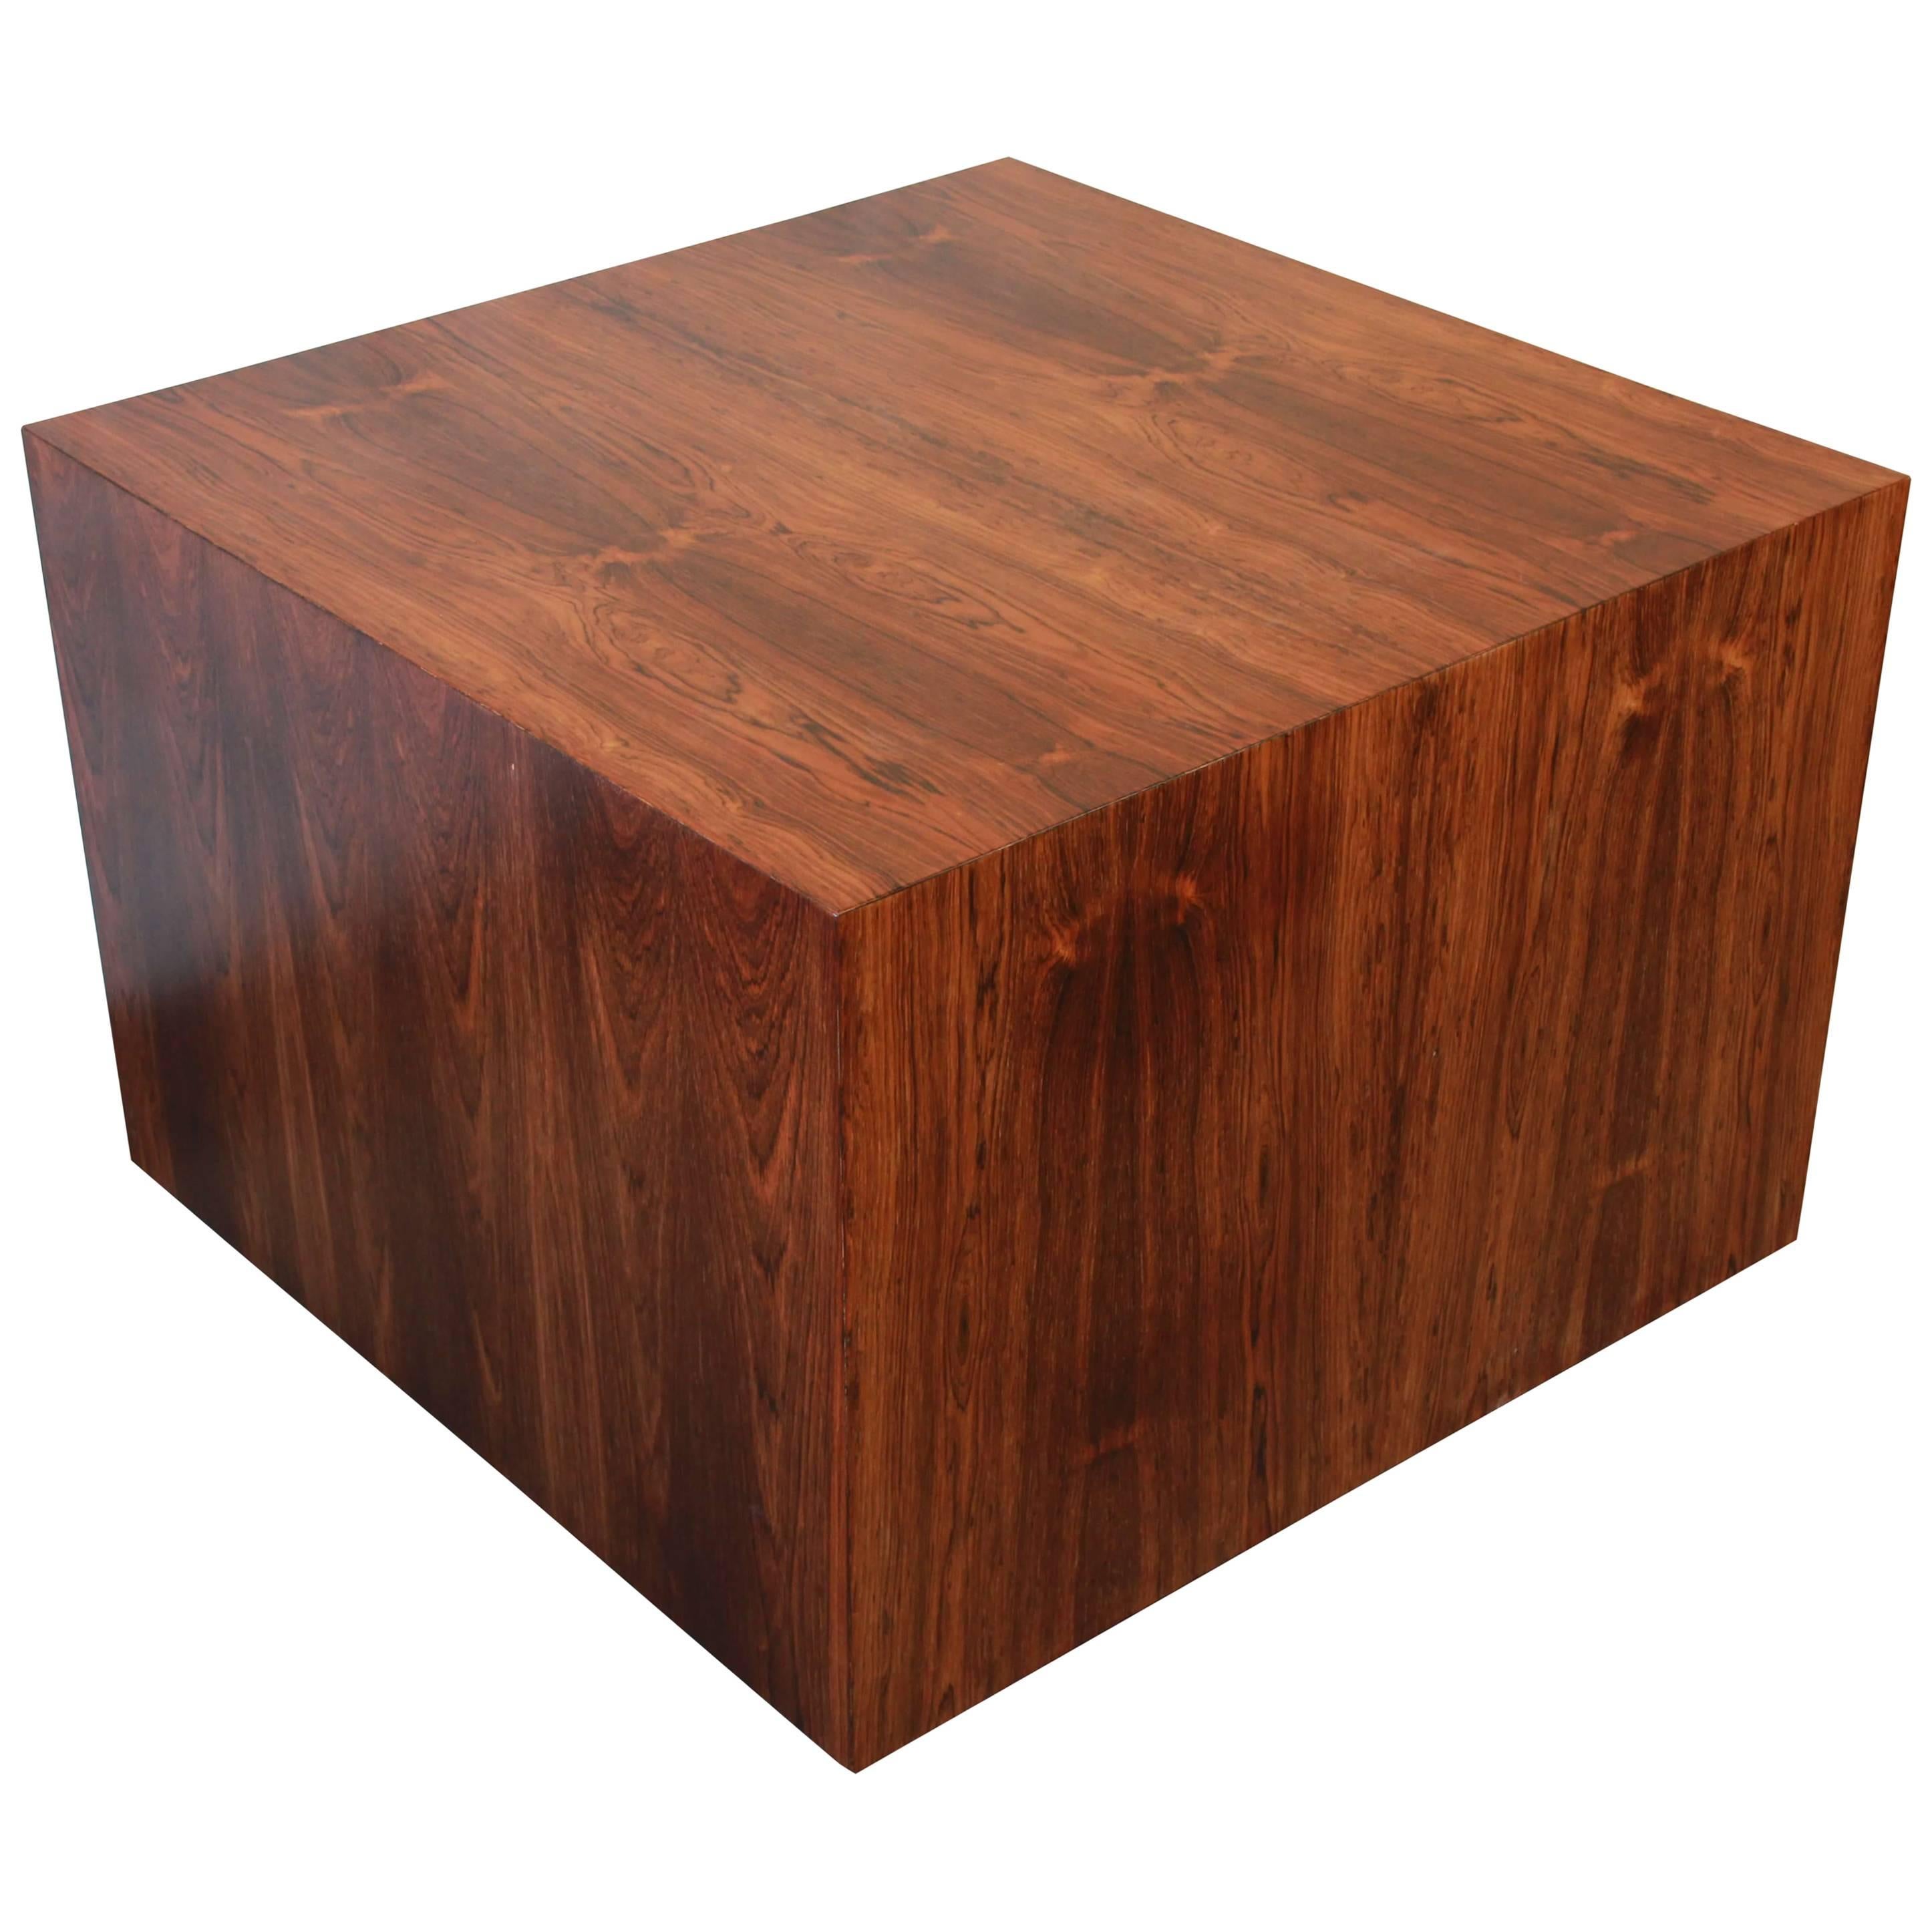 Milo Baughman for Thayer Coggin Rosewood Cube Coffee Table